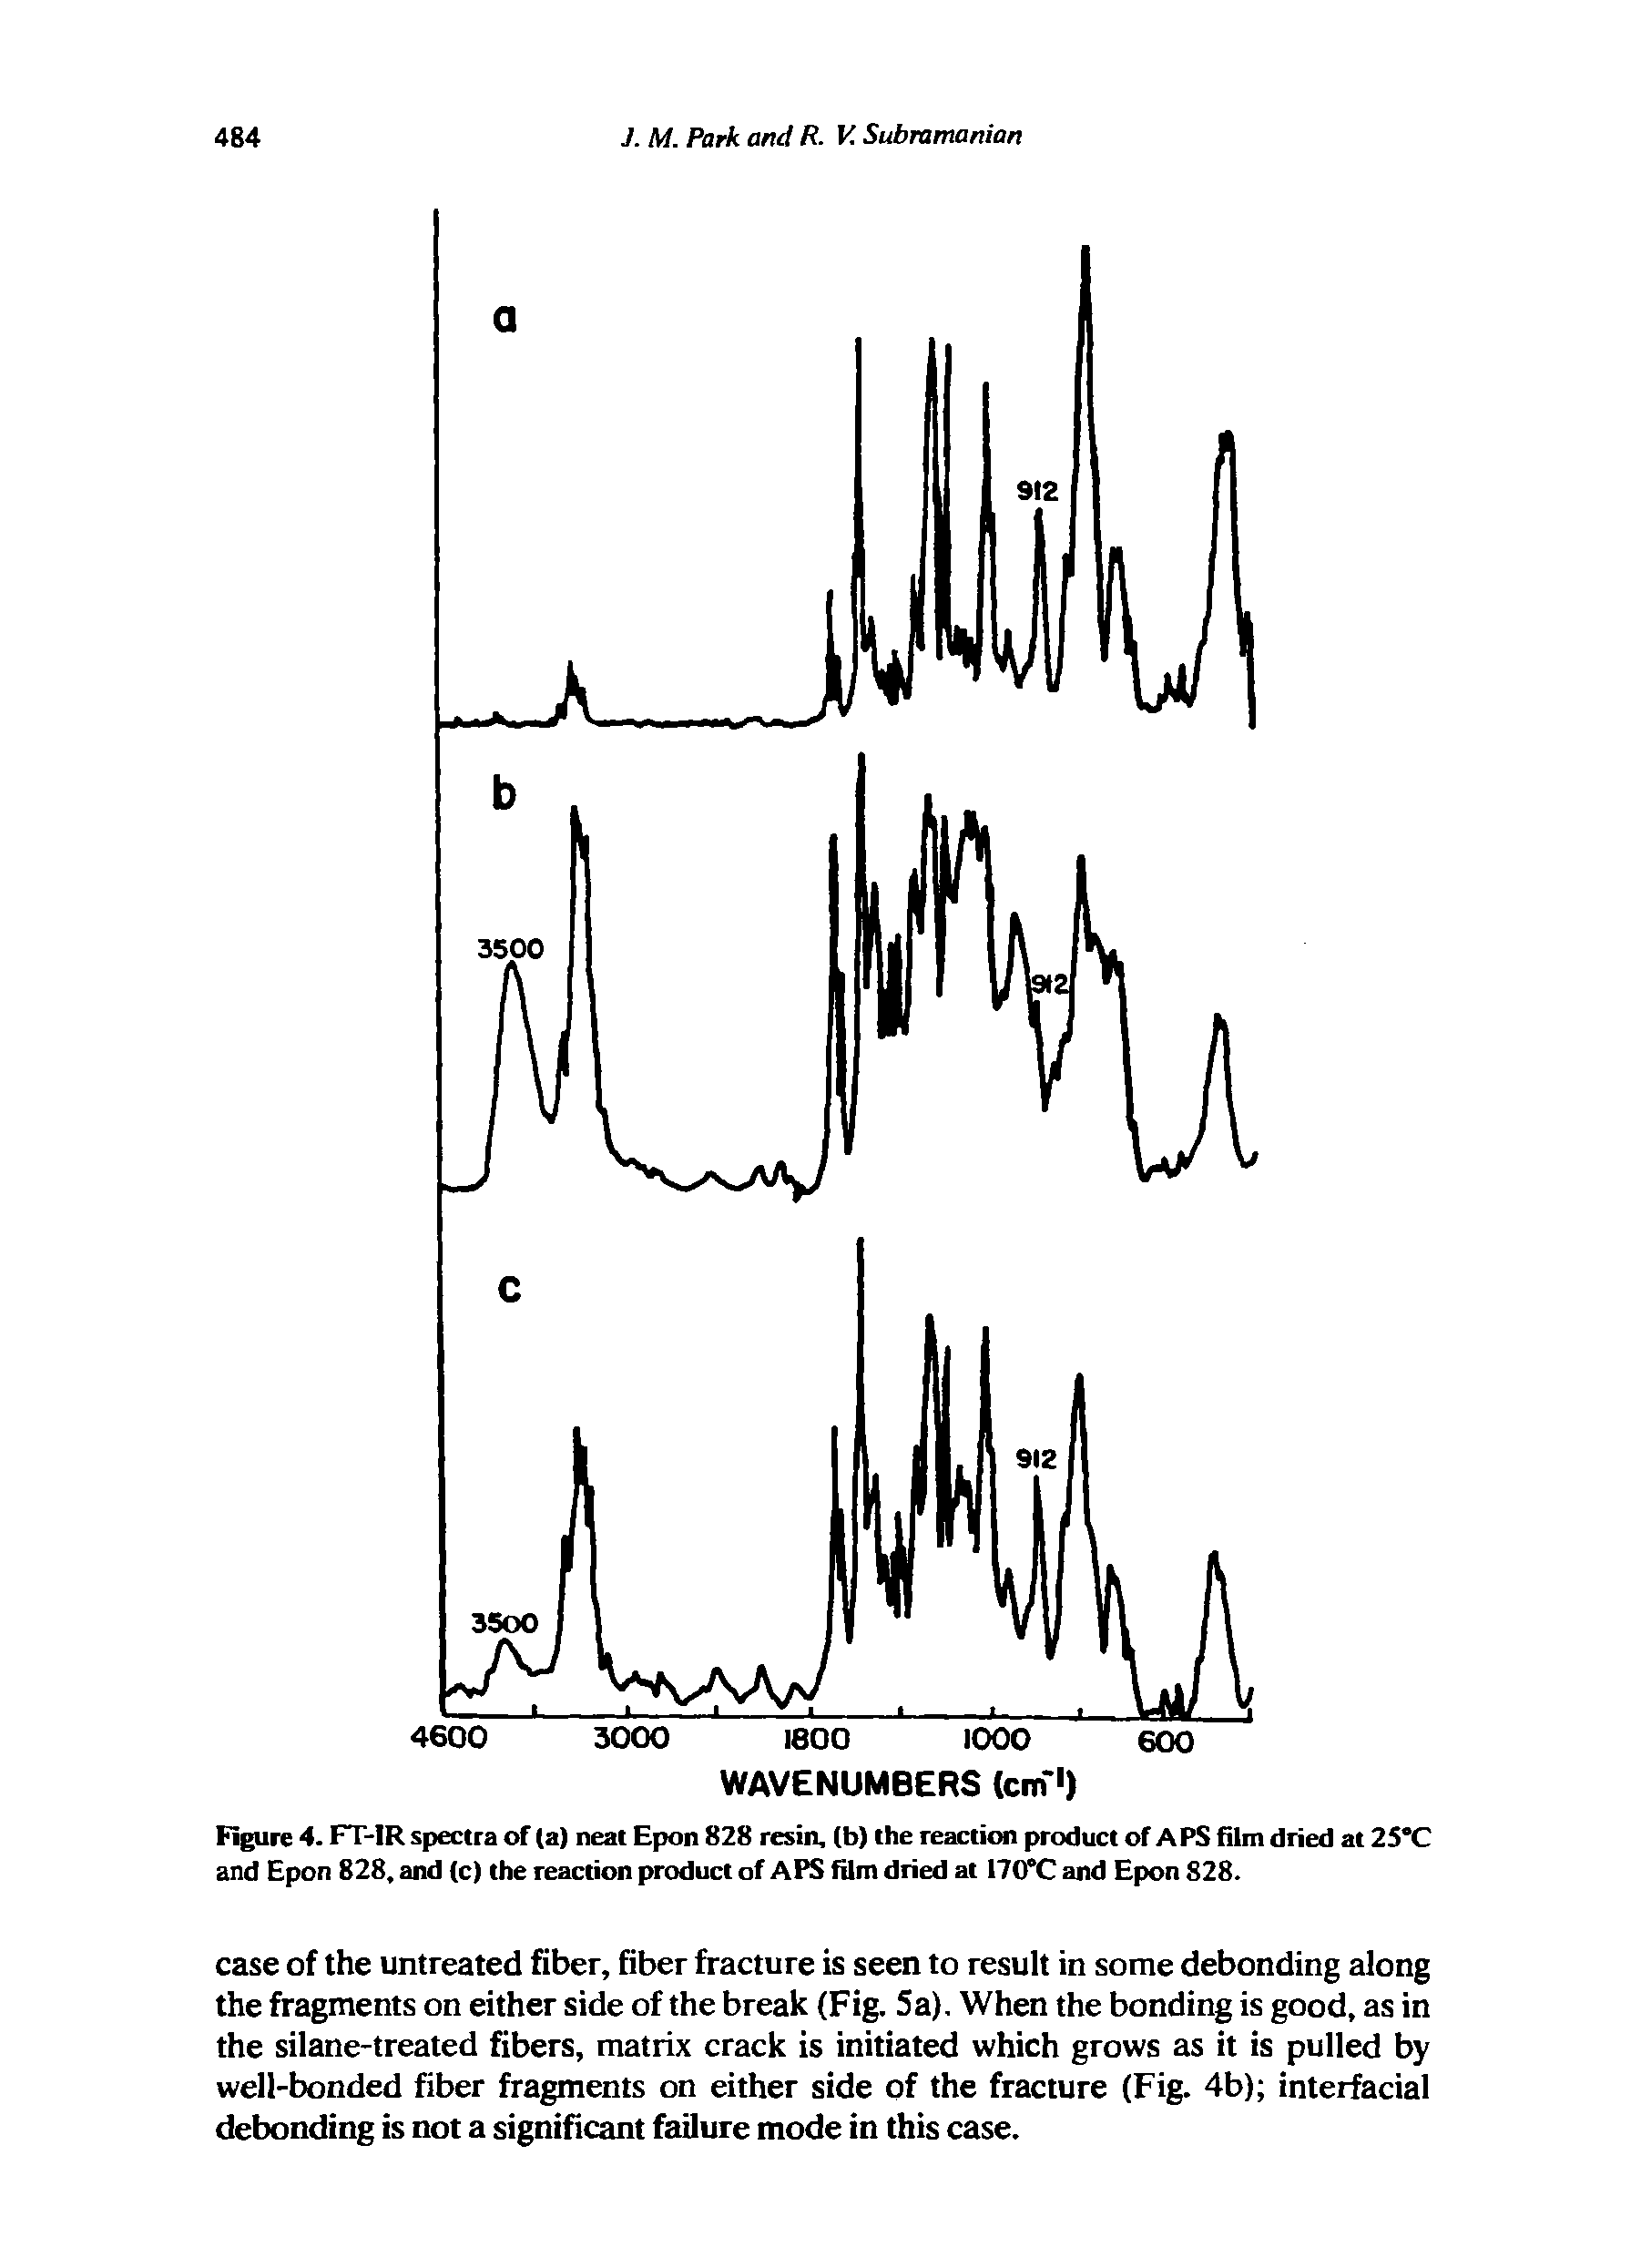 Figure 4. FT-IR spectra of (a) neat Epon 828 resin, (b) the reaction product of APS film dried at 25°C and Epon 828, and (c) the reaction product of APS film dried at 170°C and Epon 828.